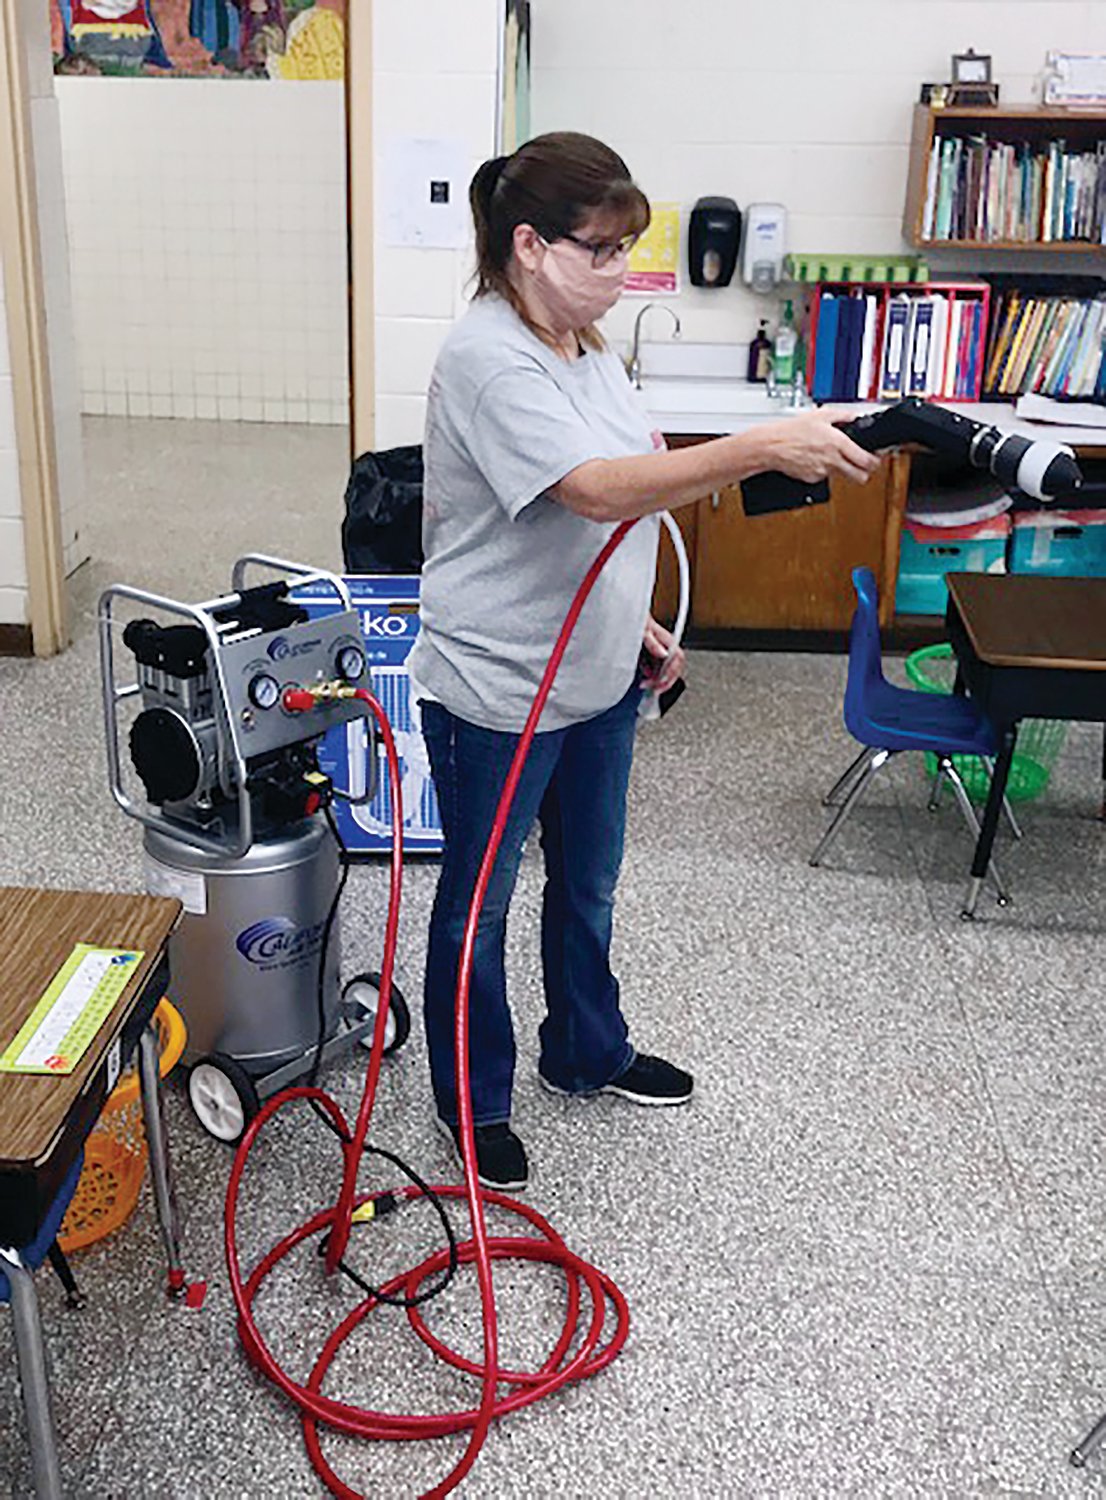 Father John V. Doyle School in Coventry has added increased cleaning protocols including the purchase of an electrostatic spray cleaner for classrooms.